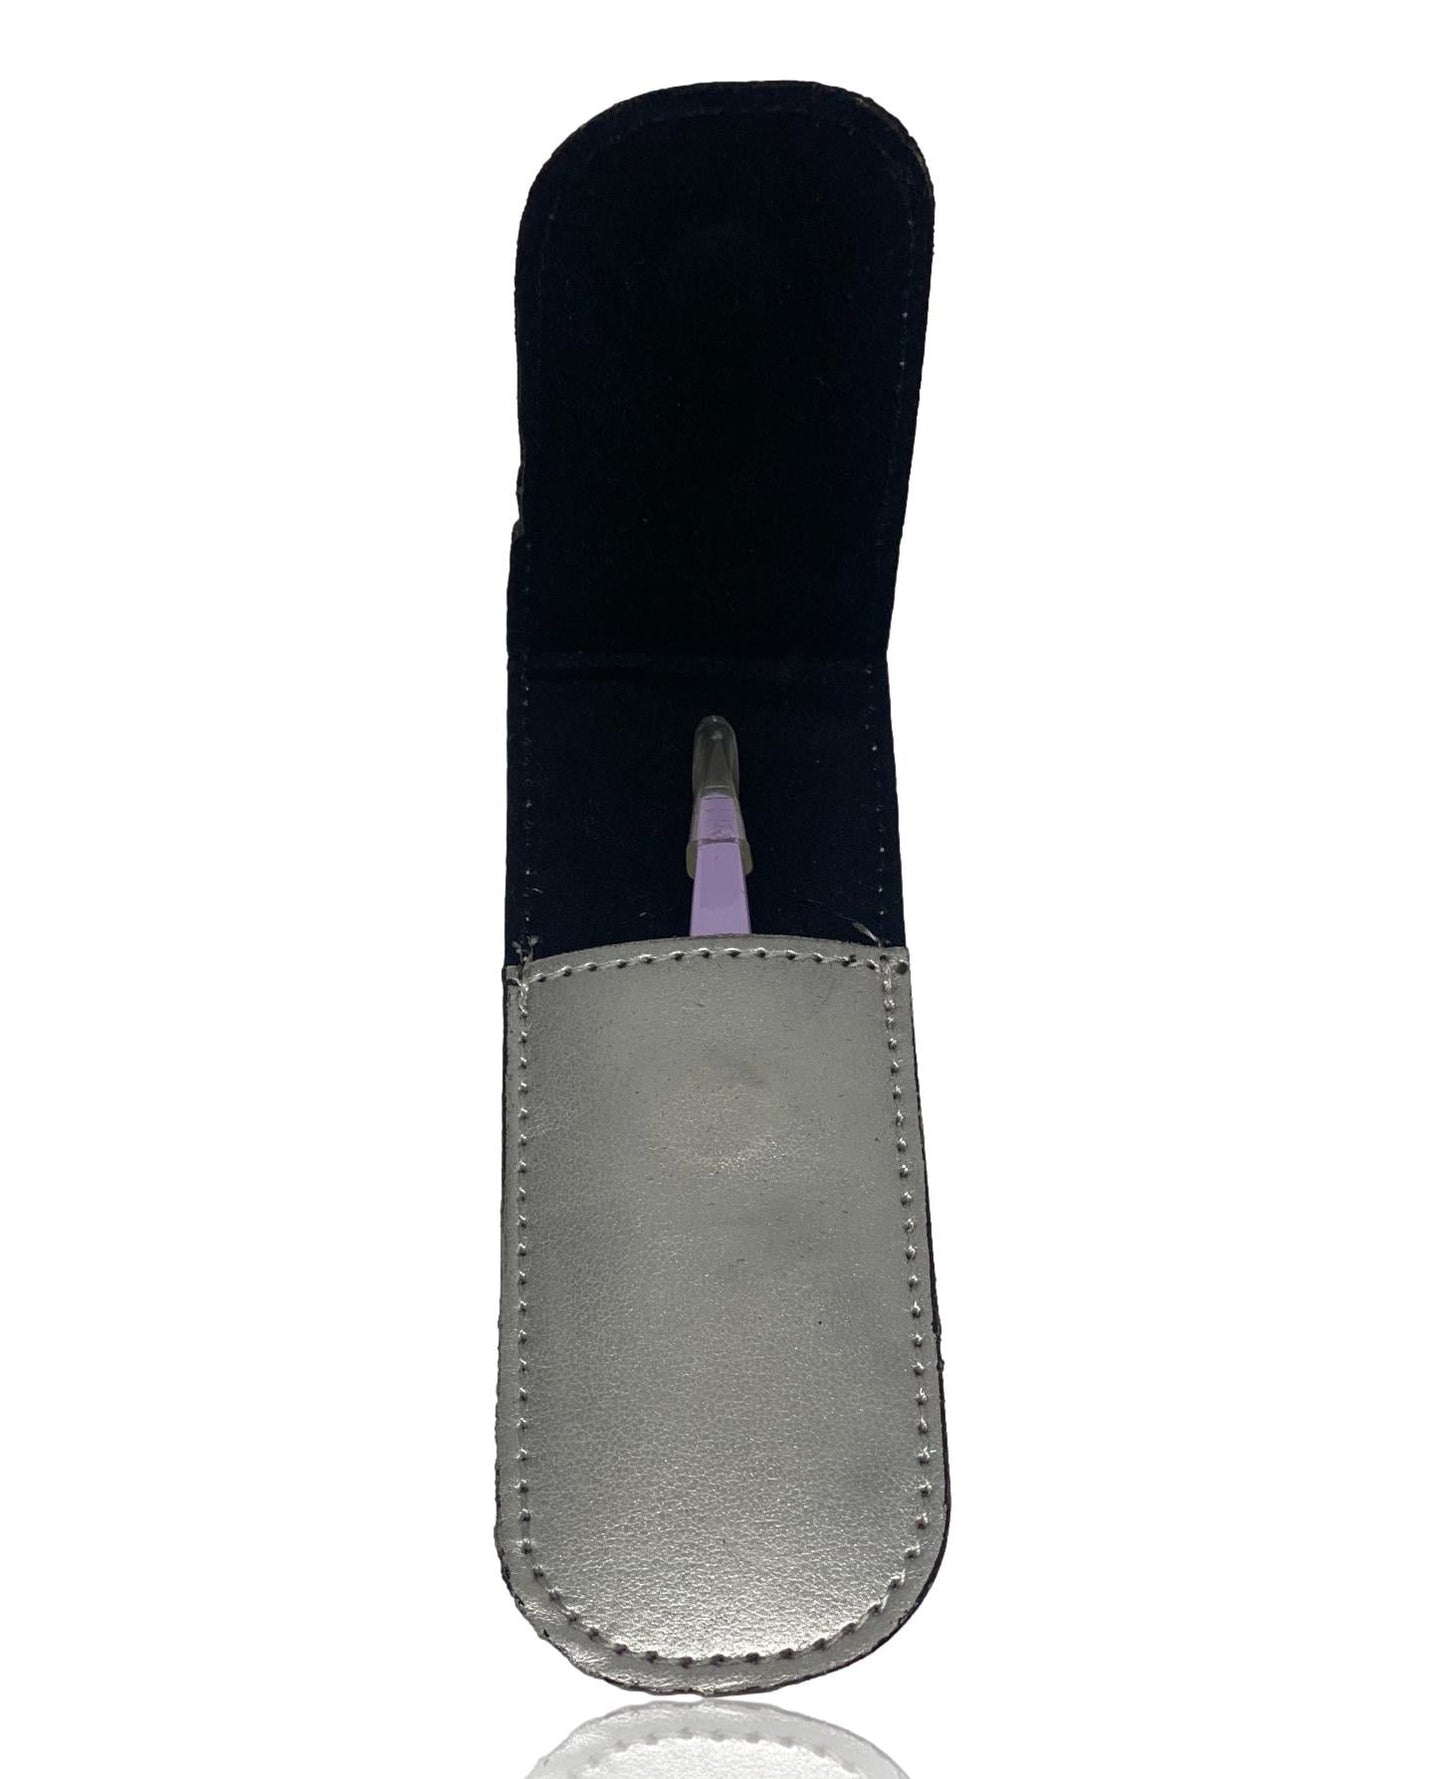 Shavata Pointed Tweezers Lilac with Pouch